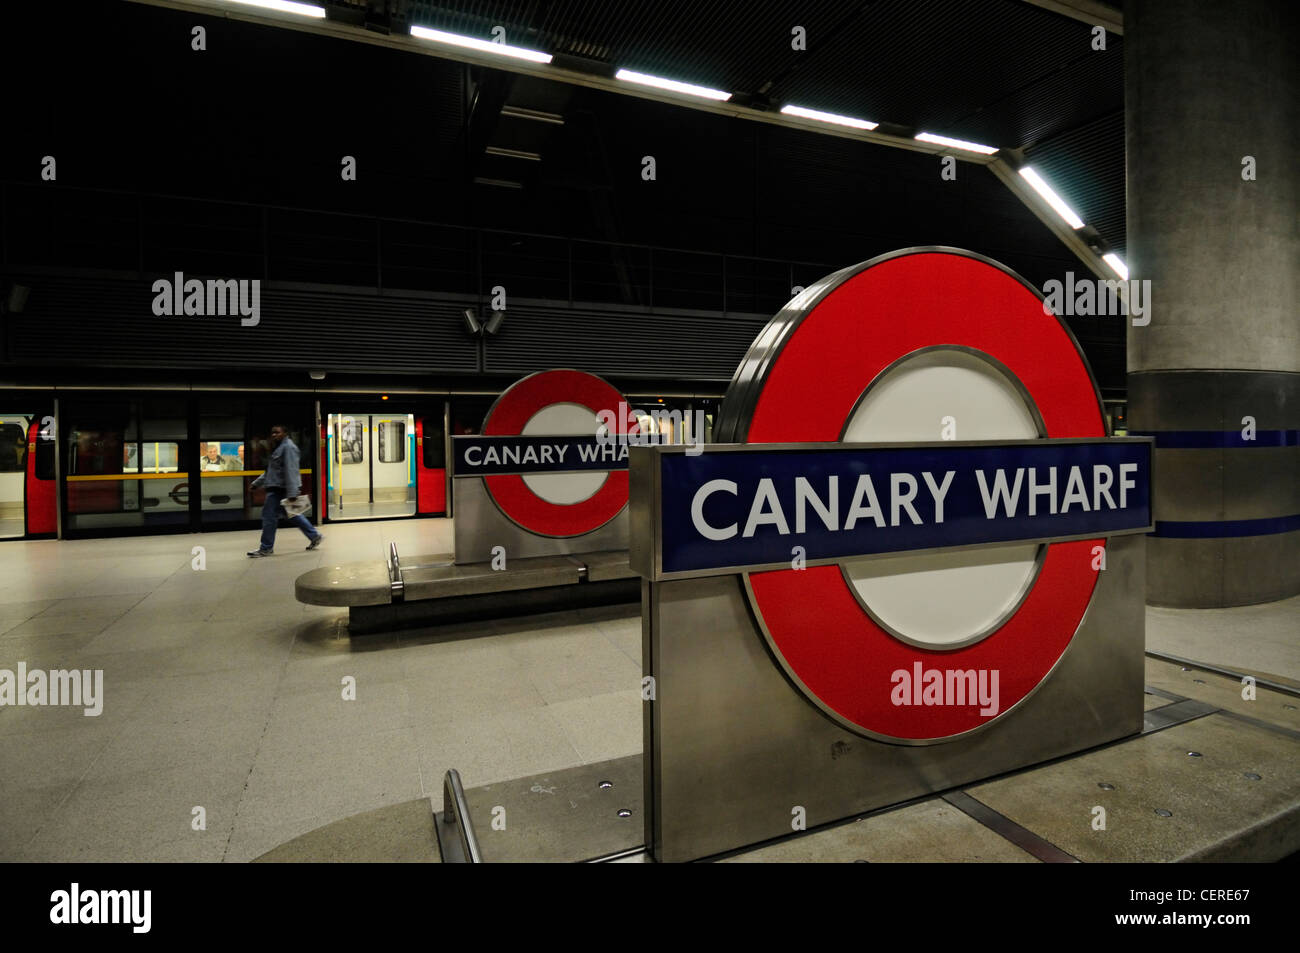 A tube train waiting at a platform in Canary Wharf Underground Station. Stock Photo